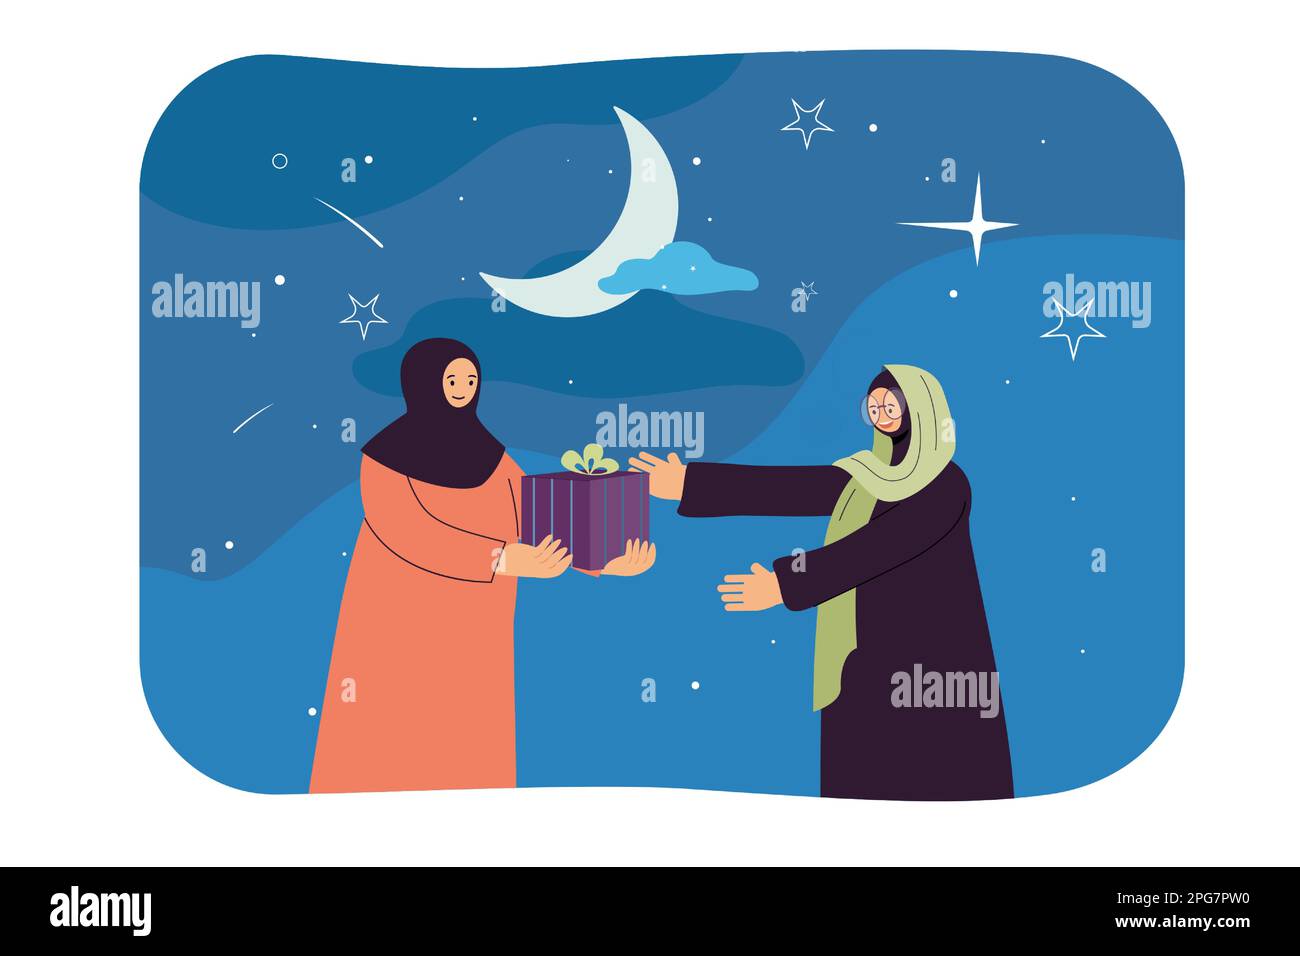 Female Muslim character giving present to mother or friend Stock Vector